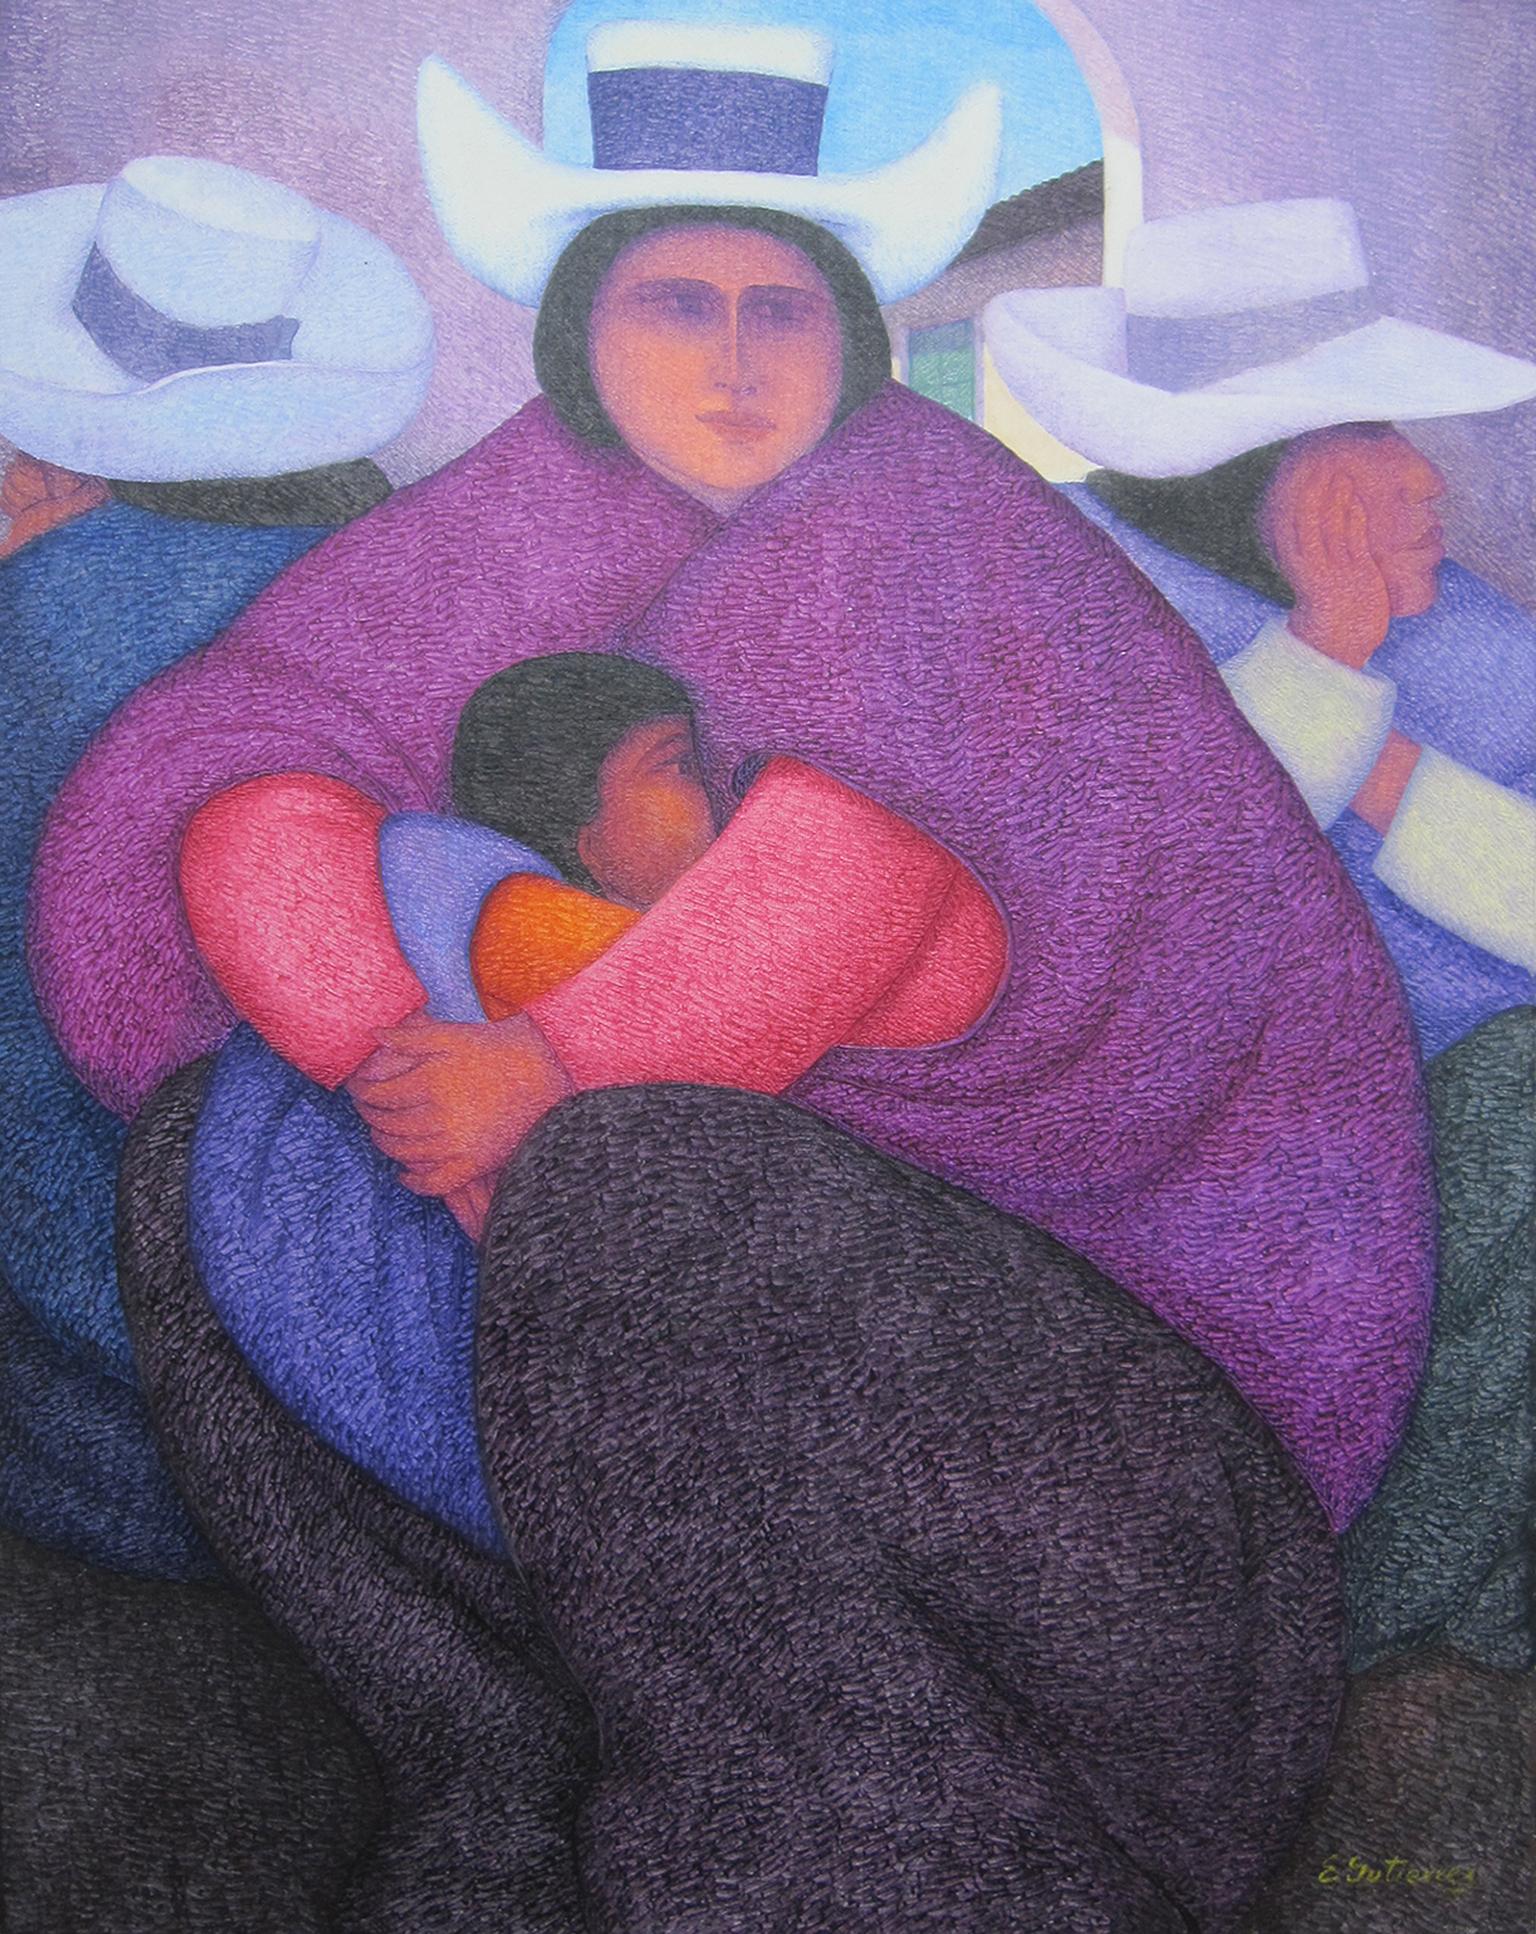 "Mother of Cajamarca, " Oil on Jute signed by Ernesto Gutierrez